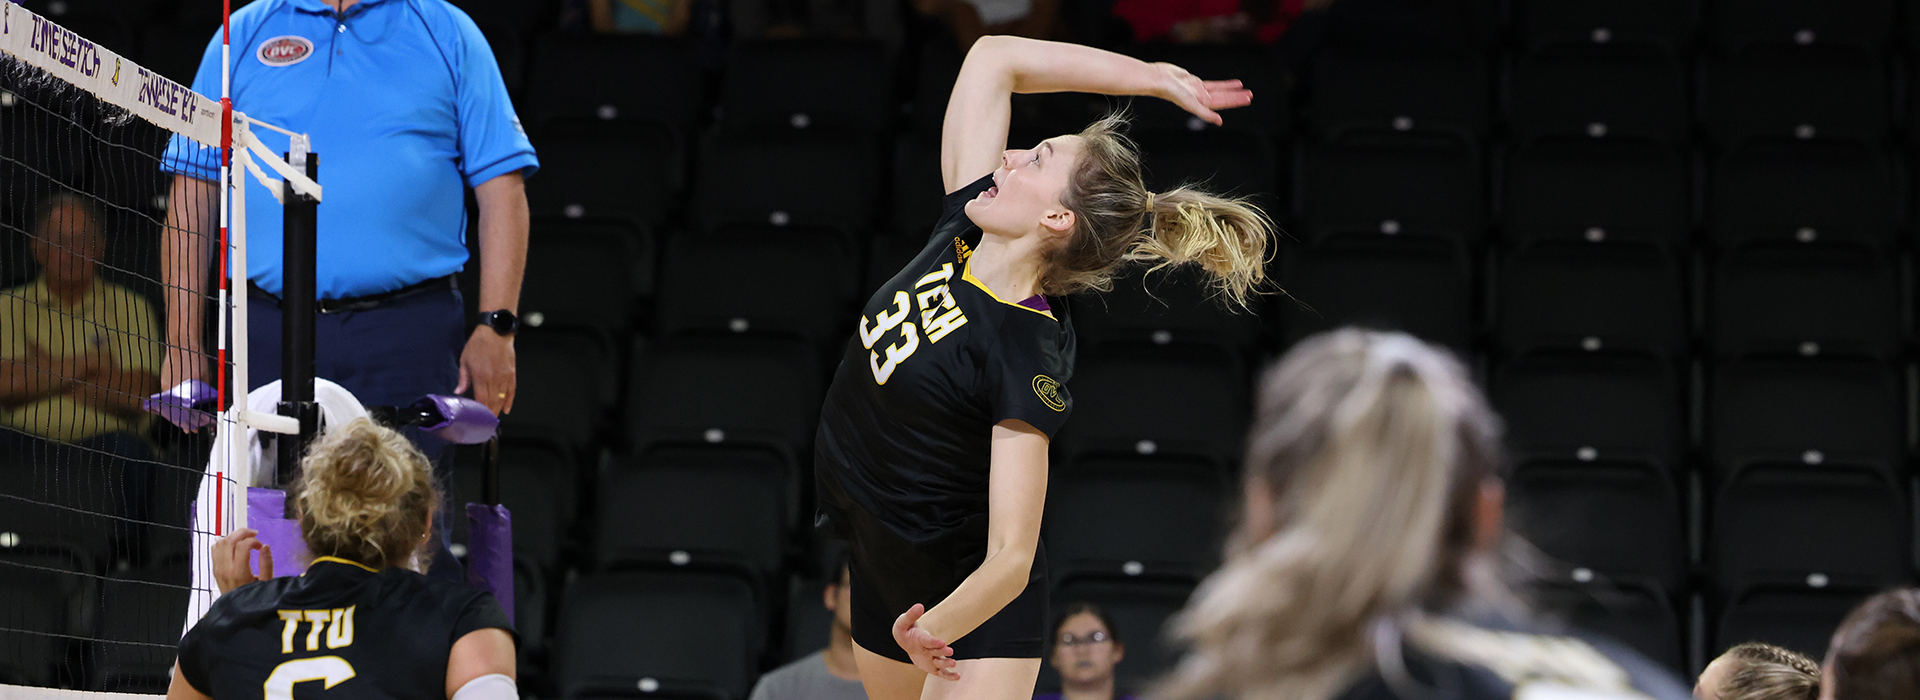 Golden Eagles fall in pair of 3-1 decisions on first day of home tournament